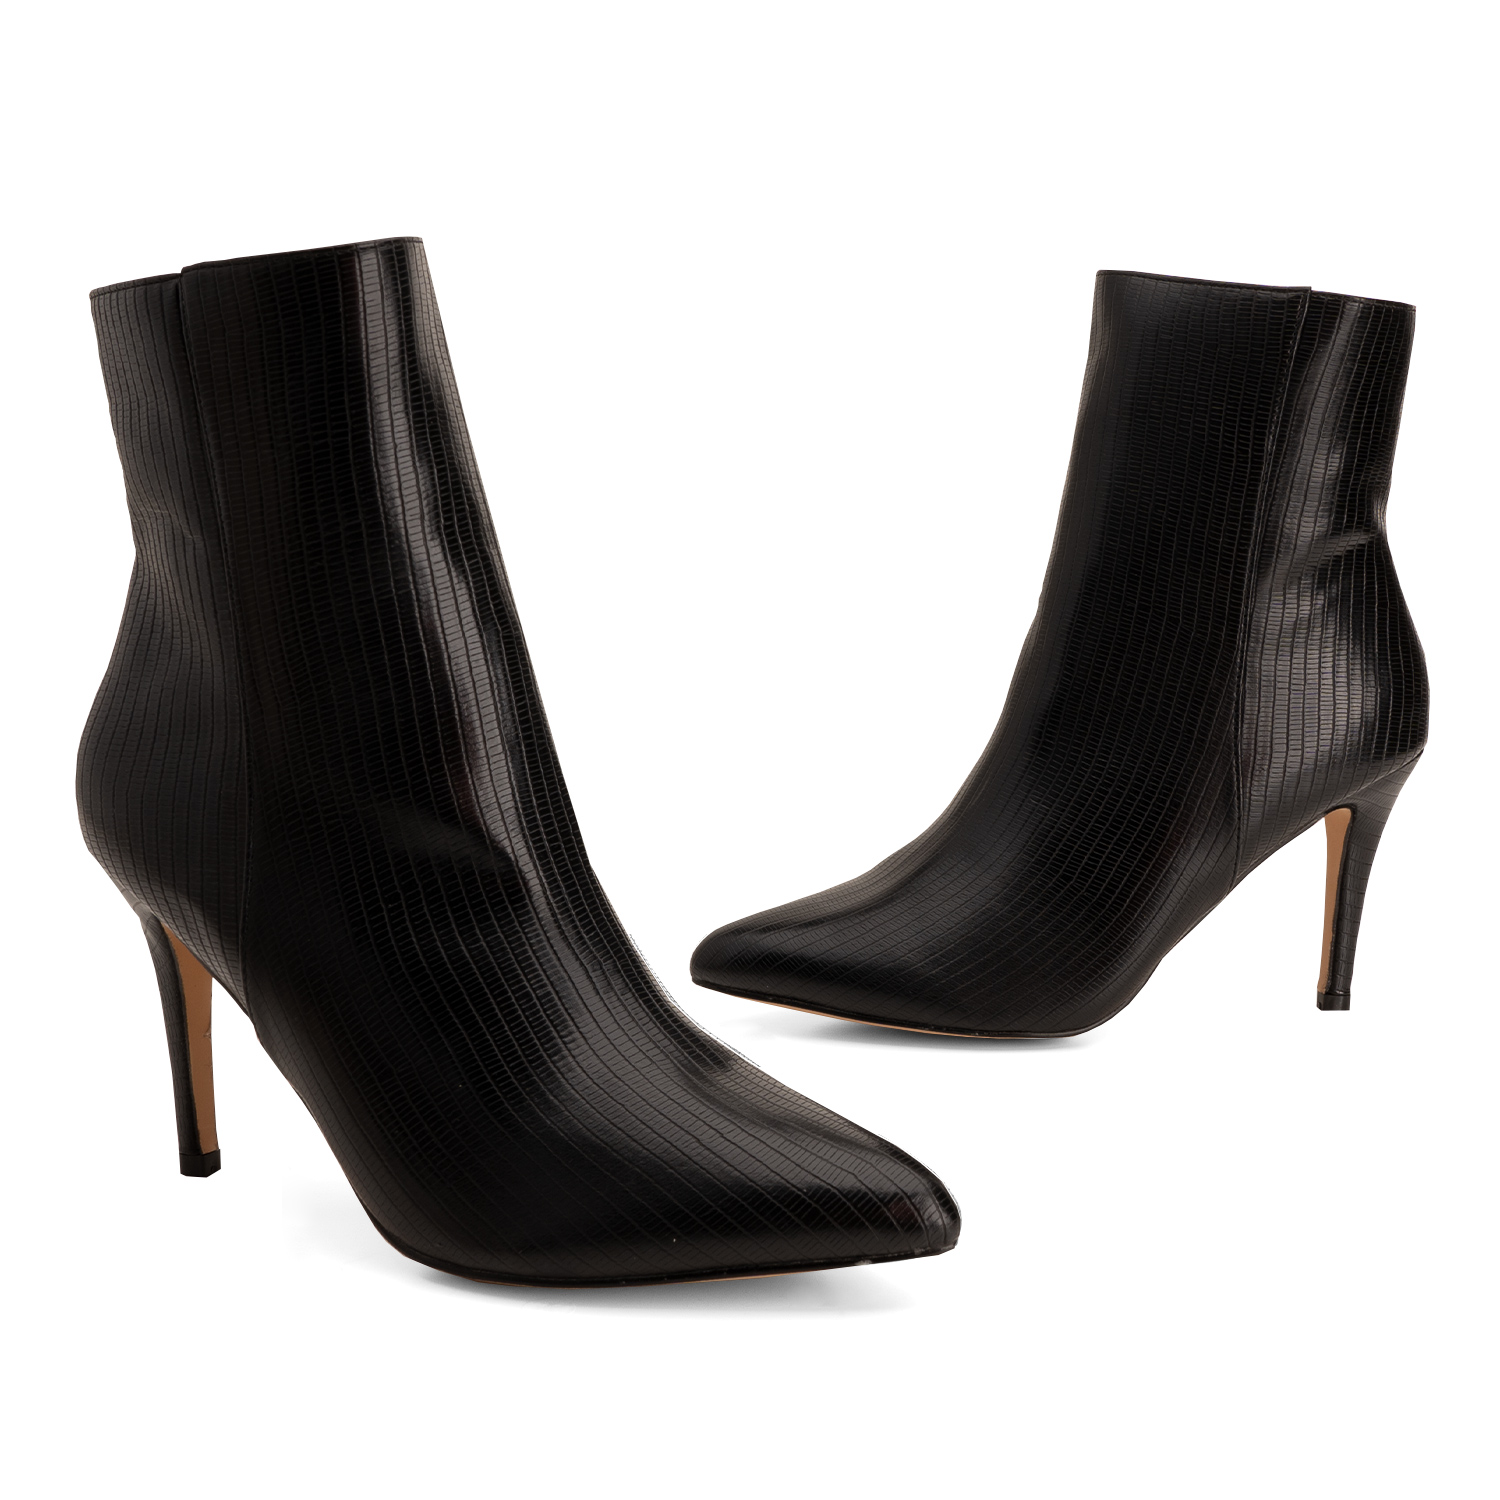 Pointed toed booties in black embossed faux leather 